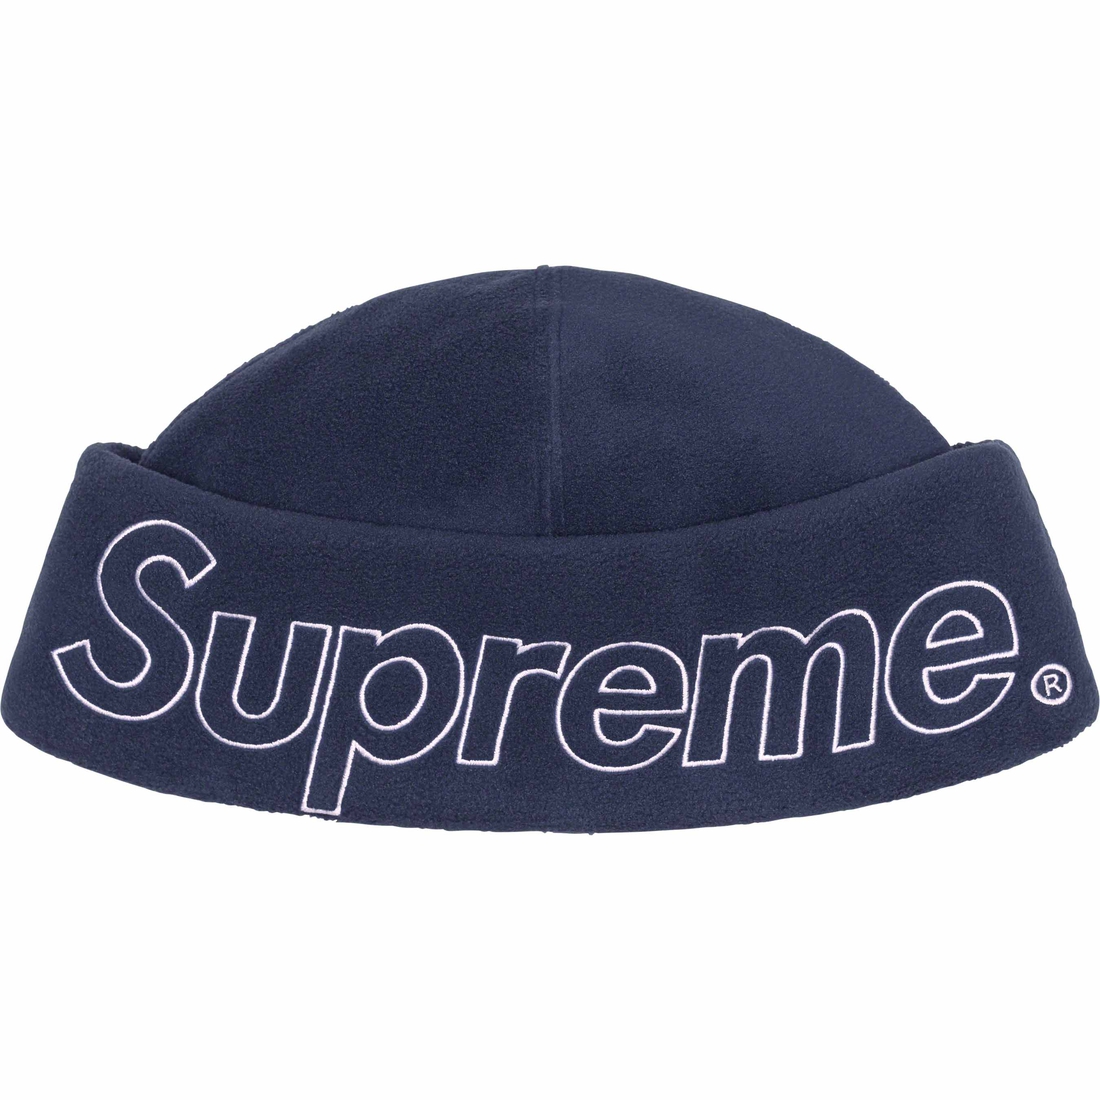 Details on Polartec Beanie Navy from fall winter
                                                    2023 (Price is $40)